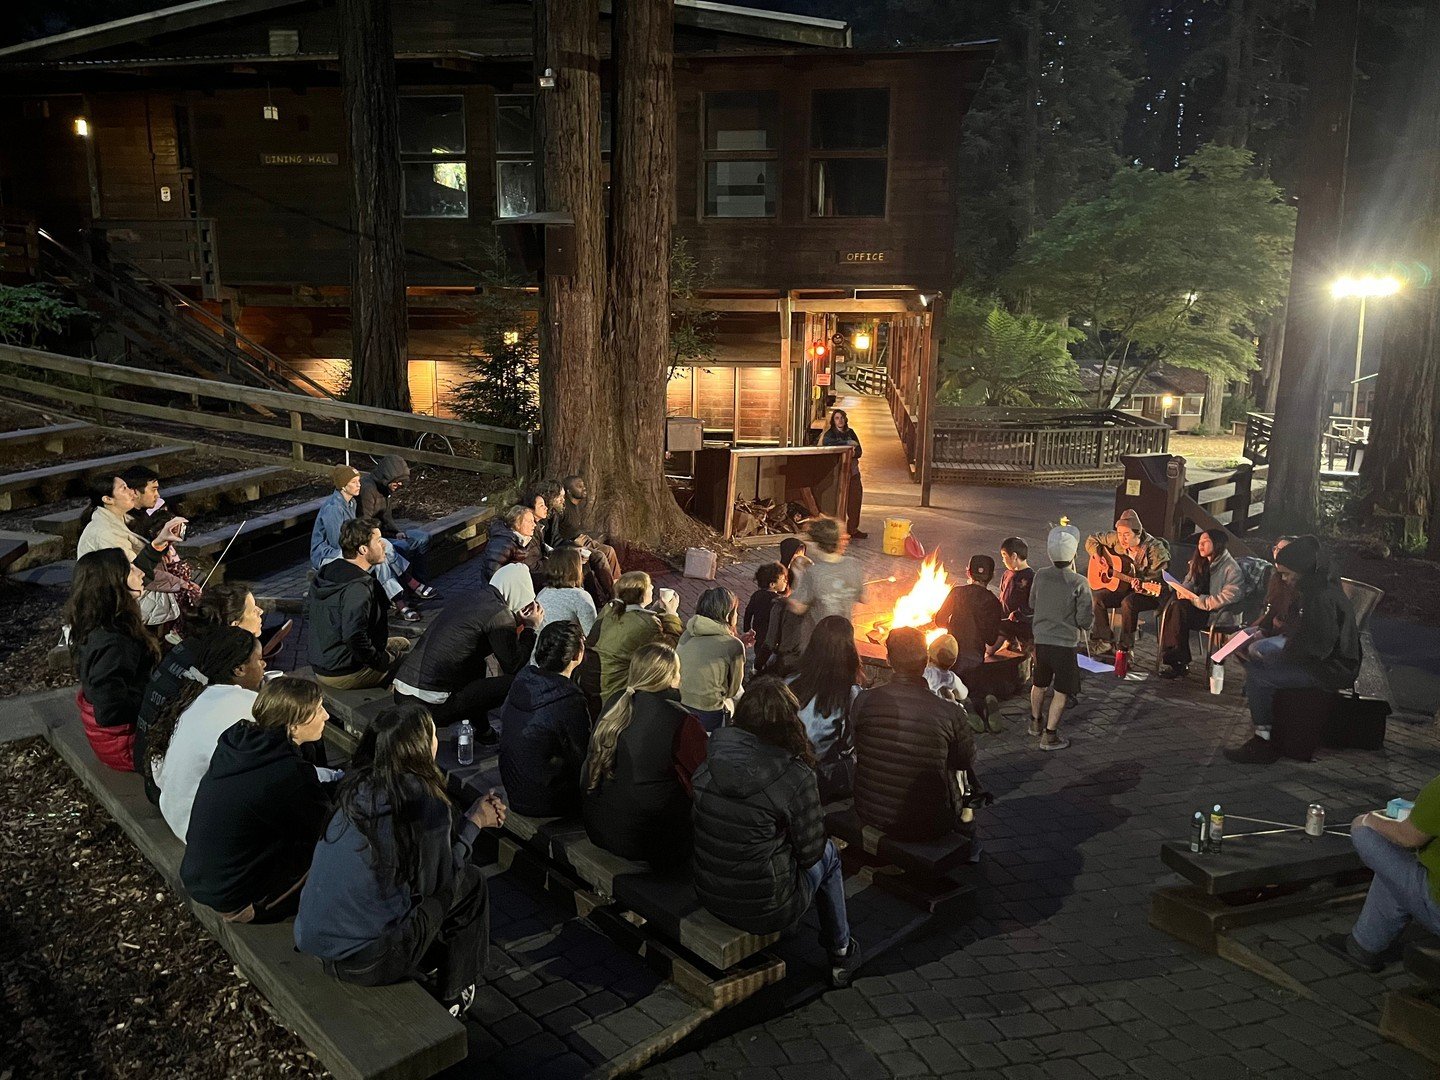 We're still processing all of the goodness from our church-wide retreat at Alliance Redwoods this past weekend, but we know that God was near and that the time together was so restorative!